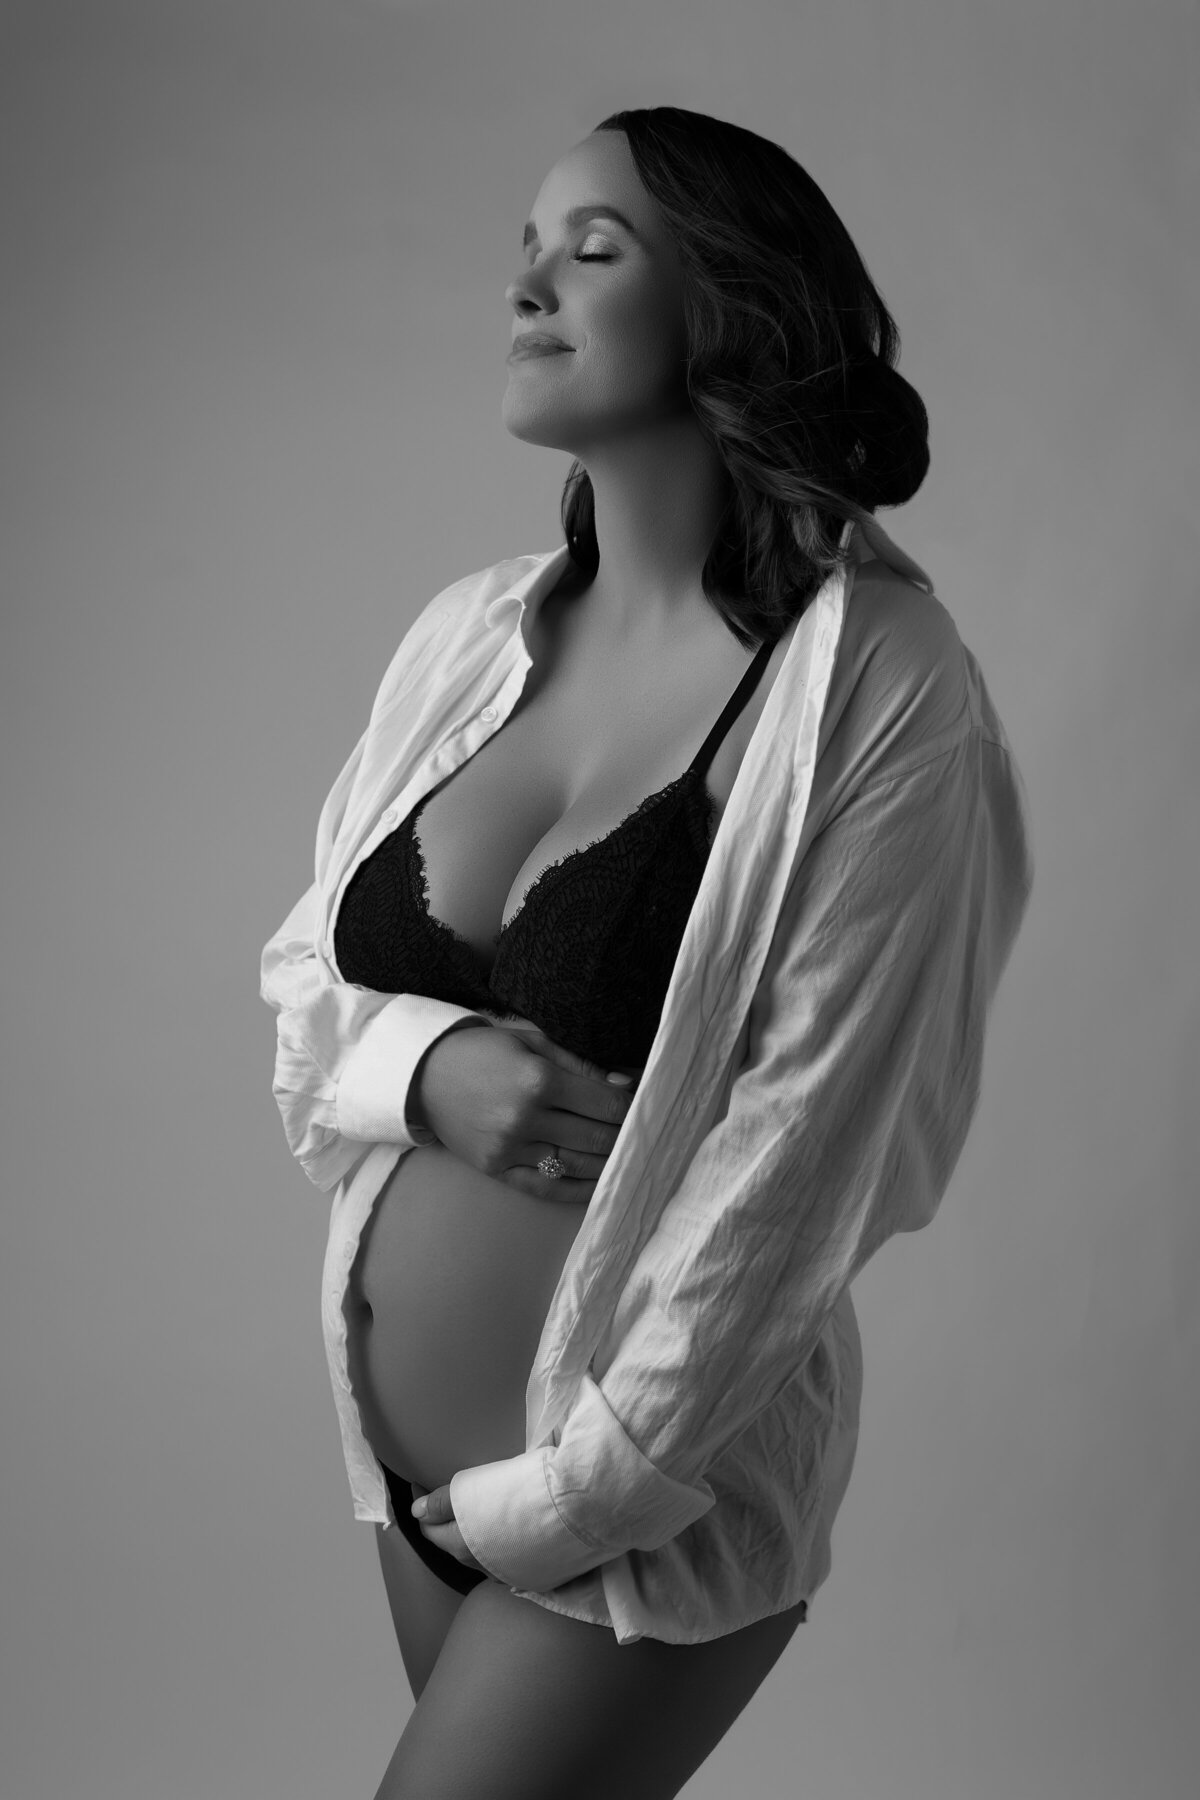 In BW Raleigh NC Maternity Portrait Photographer 19